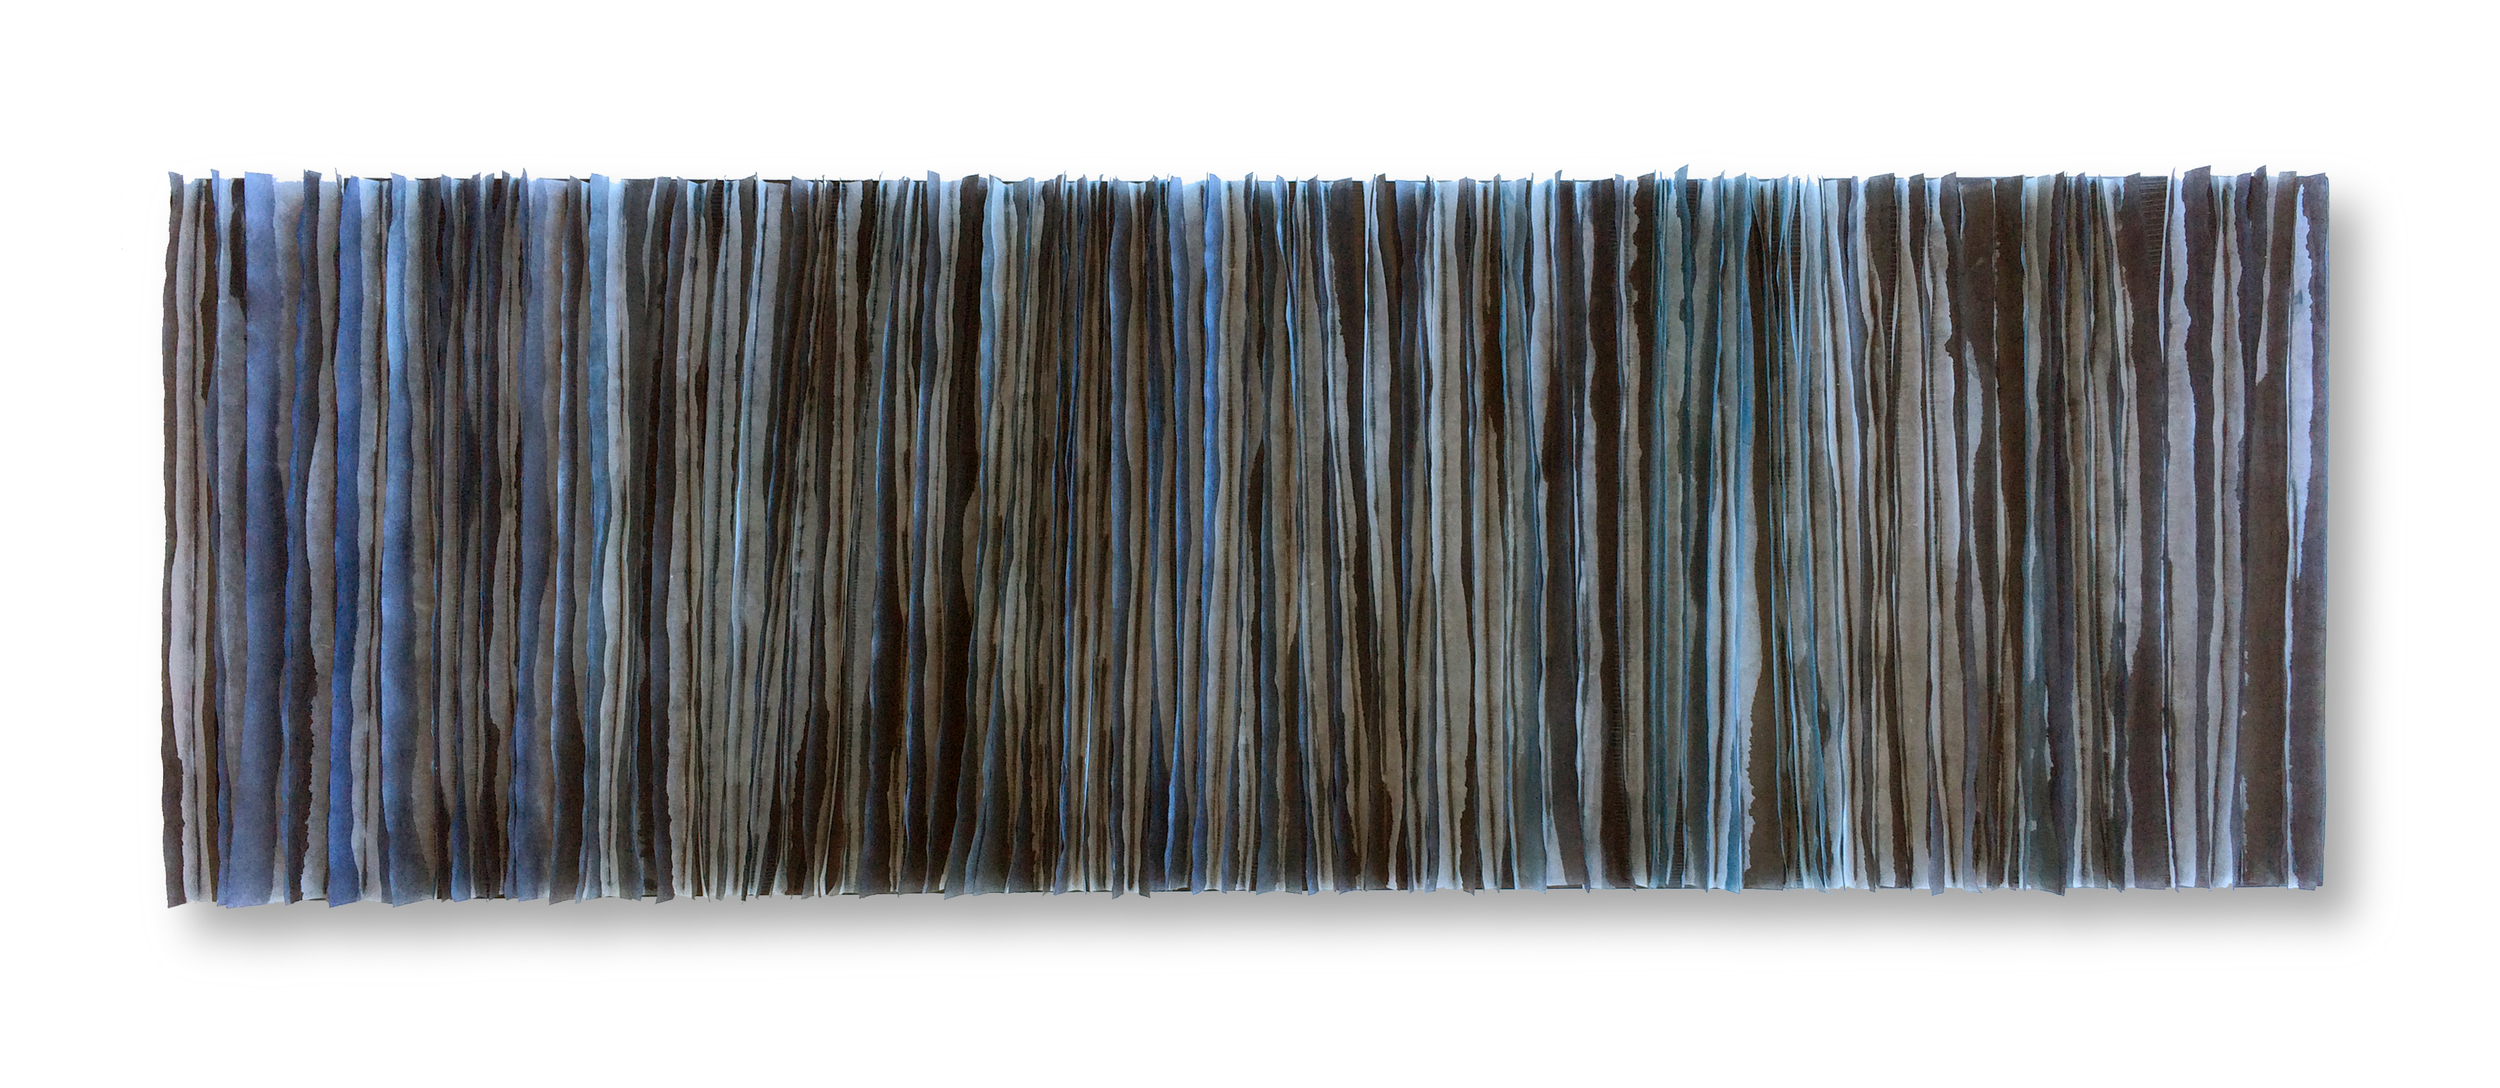  Plunge, 2016 (sold) Encaustic, Mulberry Paper, Watercolor 12 x 36&nbsp;x 1.5 inches  Plunge reflects the experience of being enveloped by water.  Layers of paper and understated color create a sense of depth whose appearance goes through subtle tran